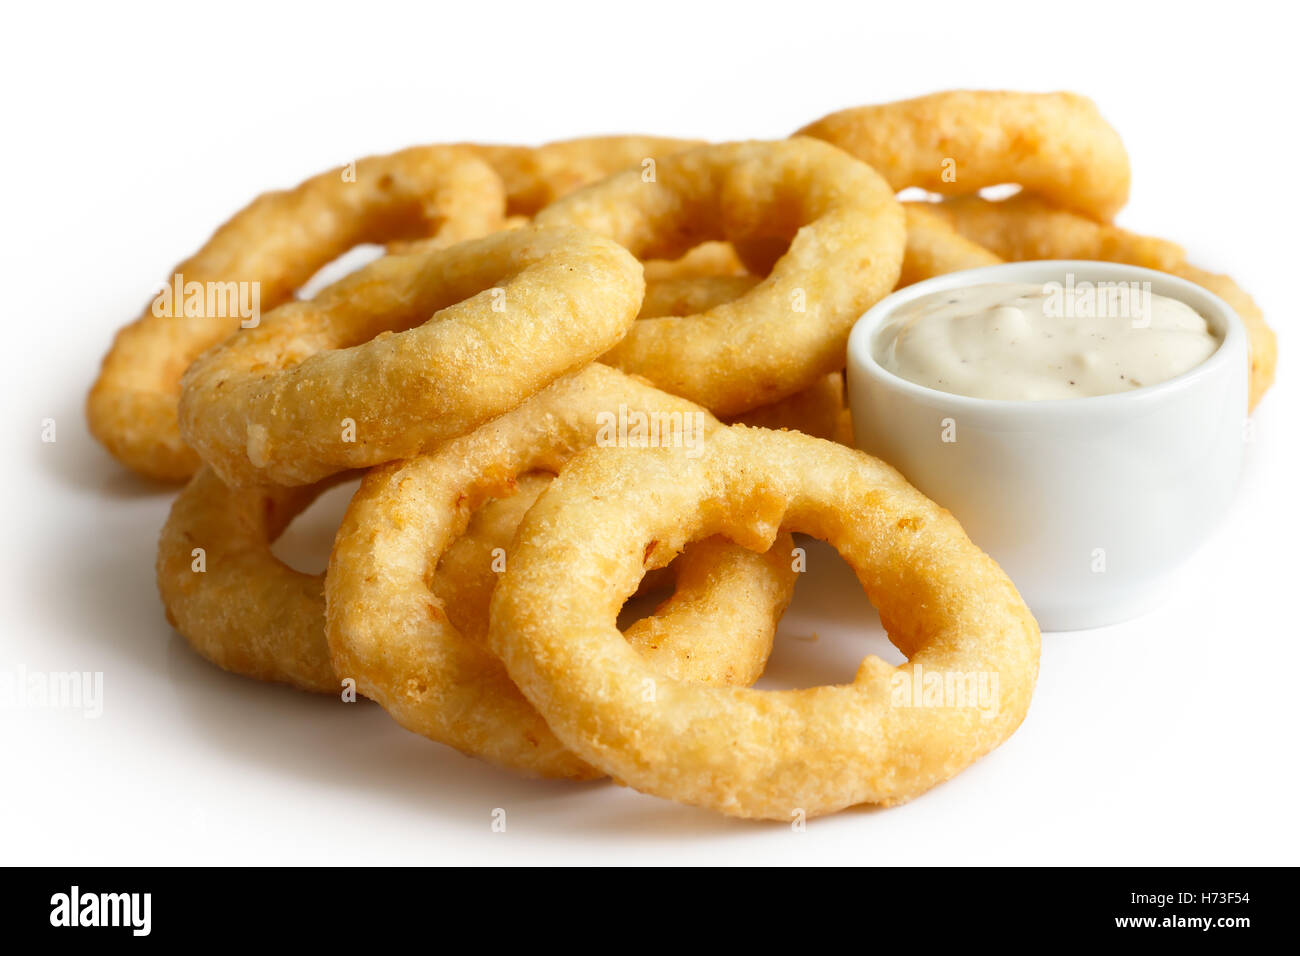 Heap of deep fried onion or calamari rings with garlic mayonnaise dip isolated on white. Stock Photo